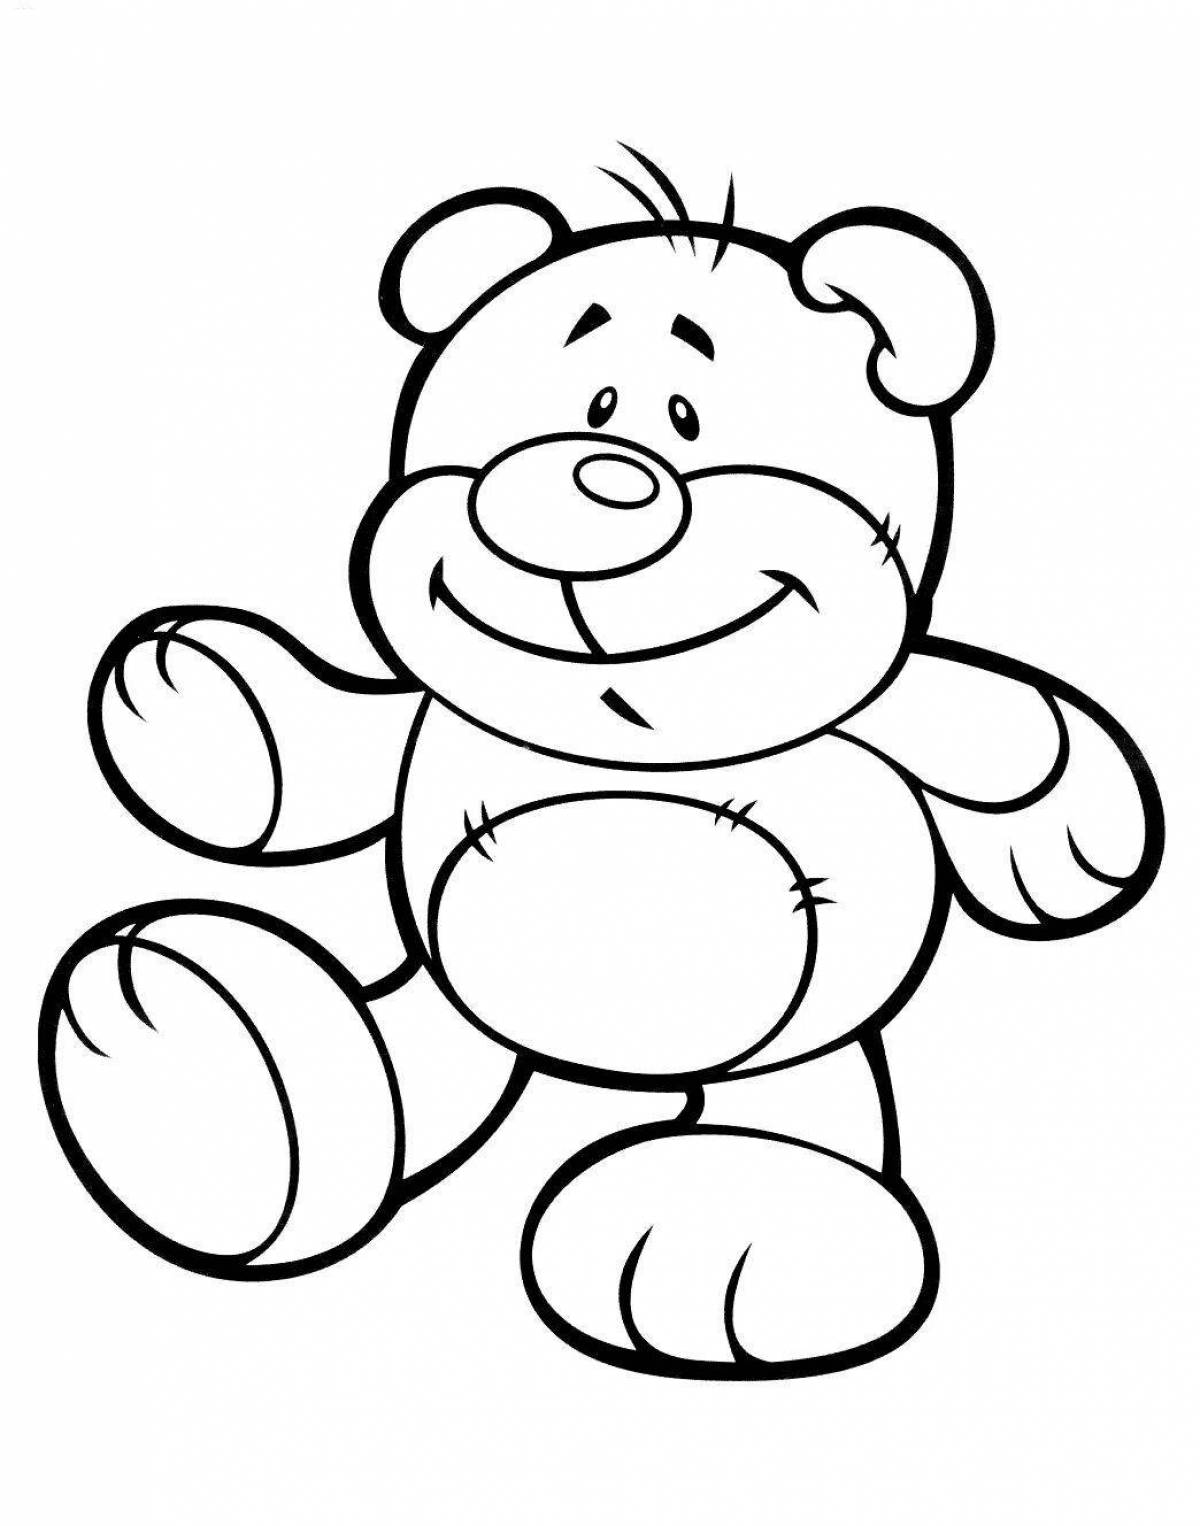 Funny coloring bear for children 3-4 years old